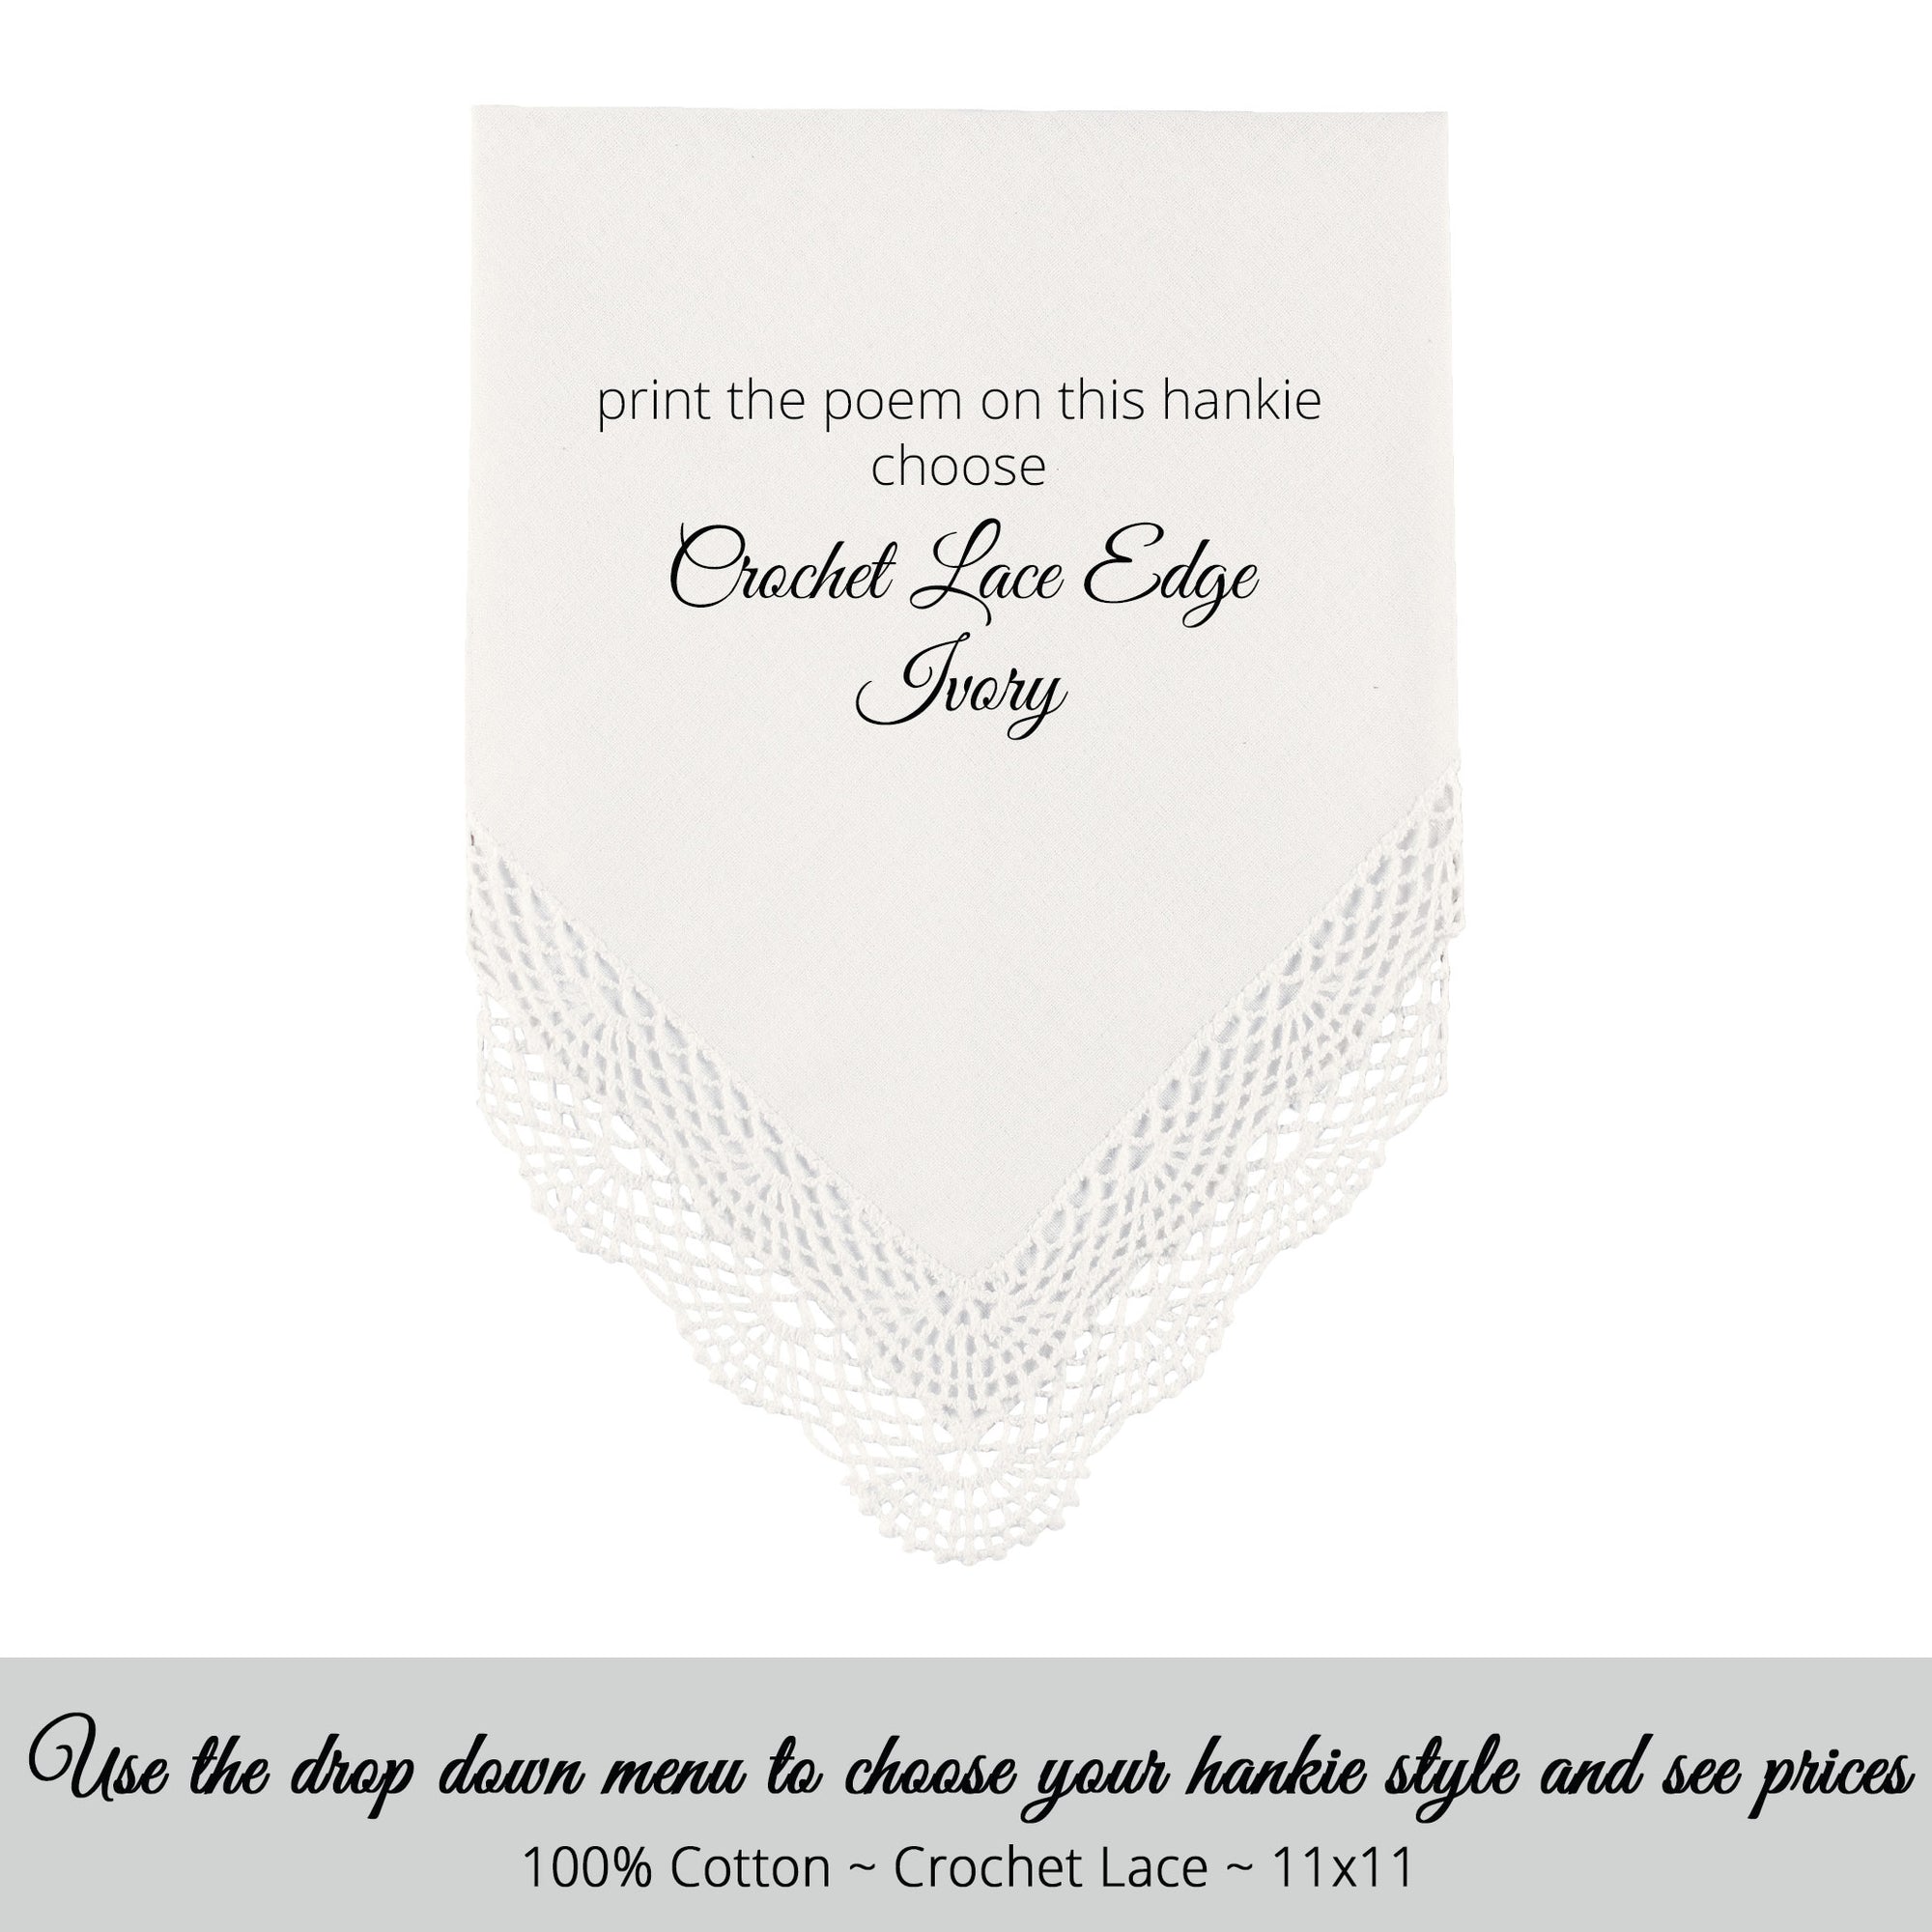 Wedding handkerchief ivory with crochet lace edge for the ring bearer